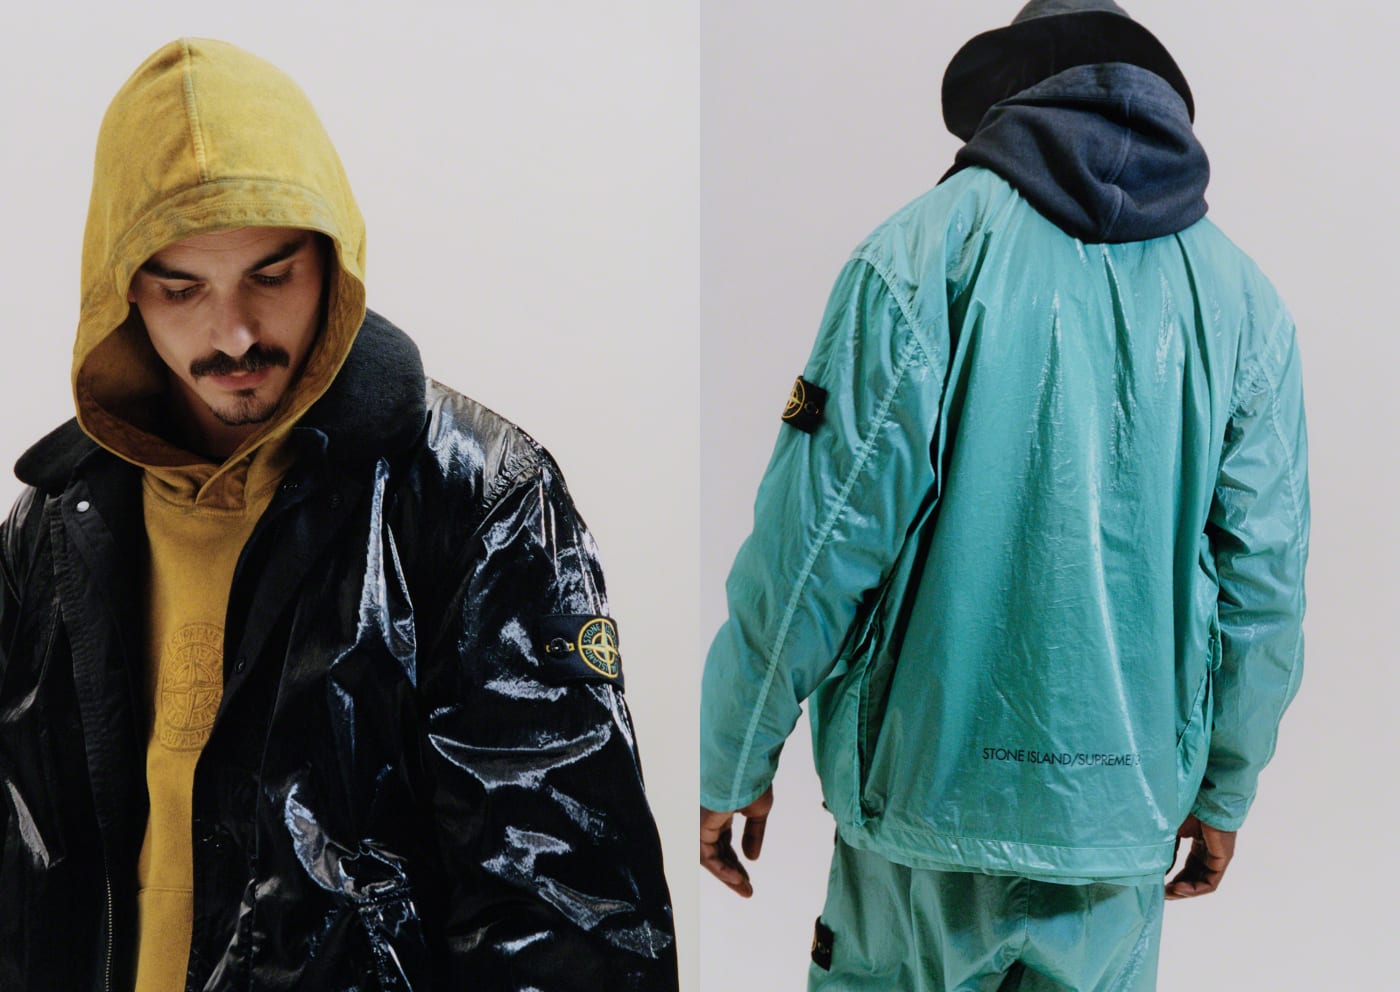 Stone Island and Supreme Are Set to Launch Arguably Their Best ...